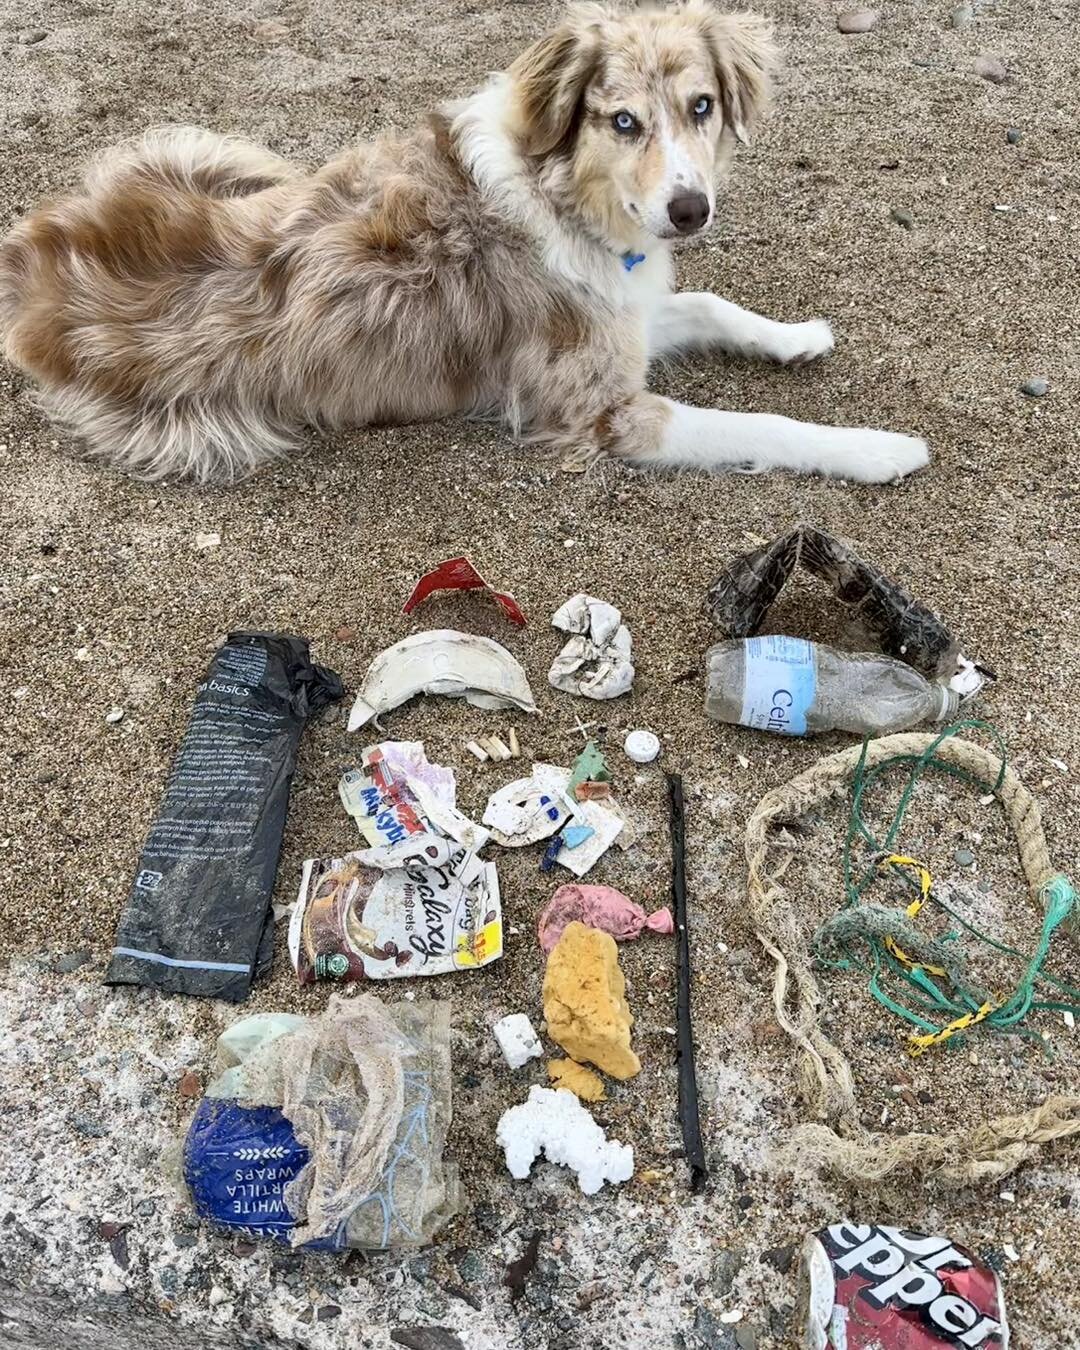 Woody looking on in disdain at today&rsquo;s #2minutebeachclean finds.

Tile spacer - how????
Fishing rope
Can
Plastic bottles
Balloon 
Cigarette butts
Bottle top
Poo bag - empty, came in handy 😜
Sweetie wrappers
Expanded foam
Polystyrene 
Visor fro